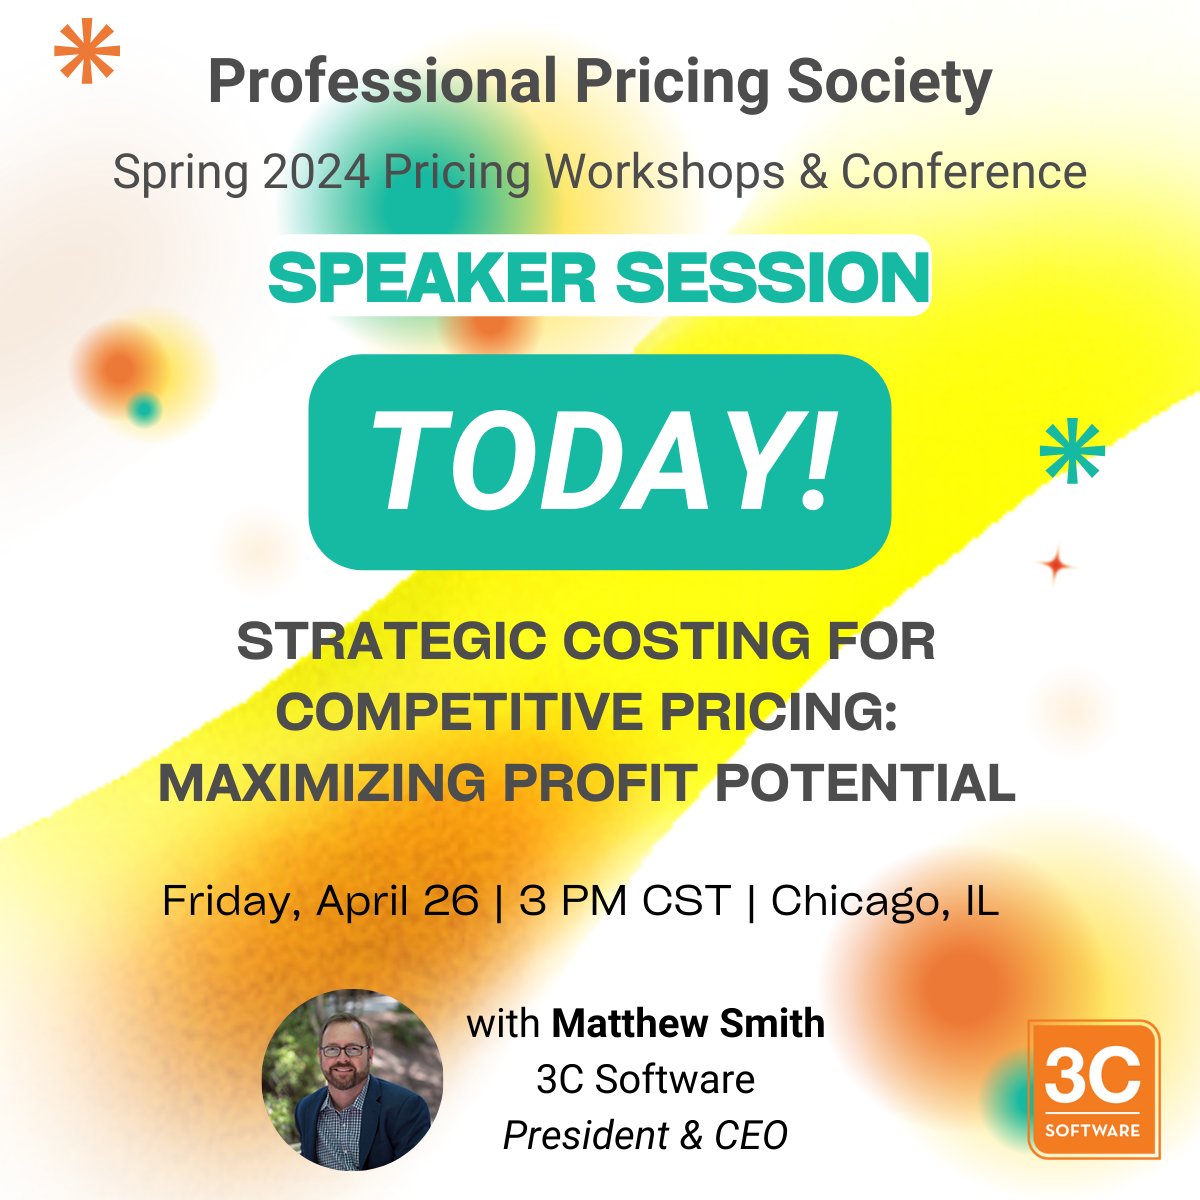 📣⏲️ TODAY in Chicago | 3PM CST

If you are at the PPS Conference, be sure to attend today's 'Strategic Costing for Competitive Pricing' session!

#costing #pricing #quoting #financeleadership #PPSCHI24